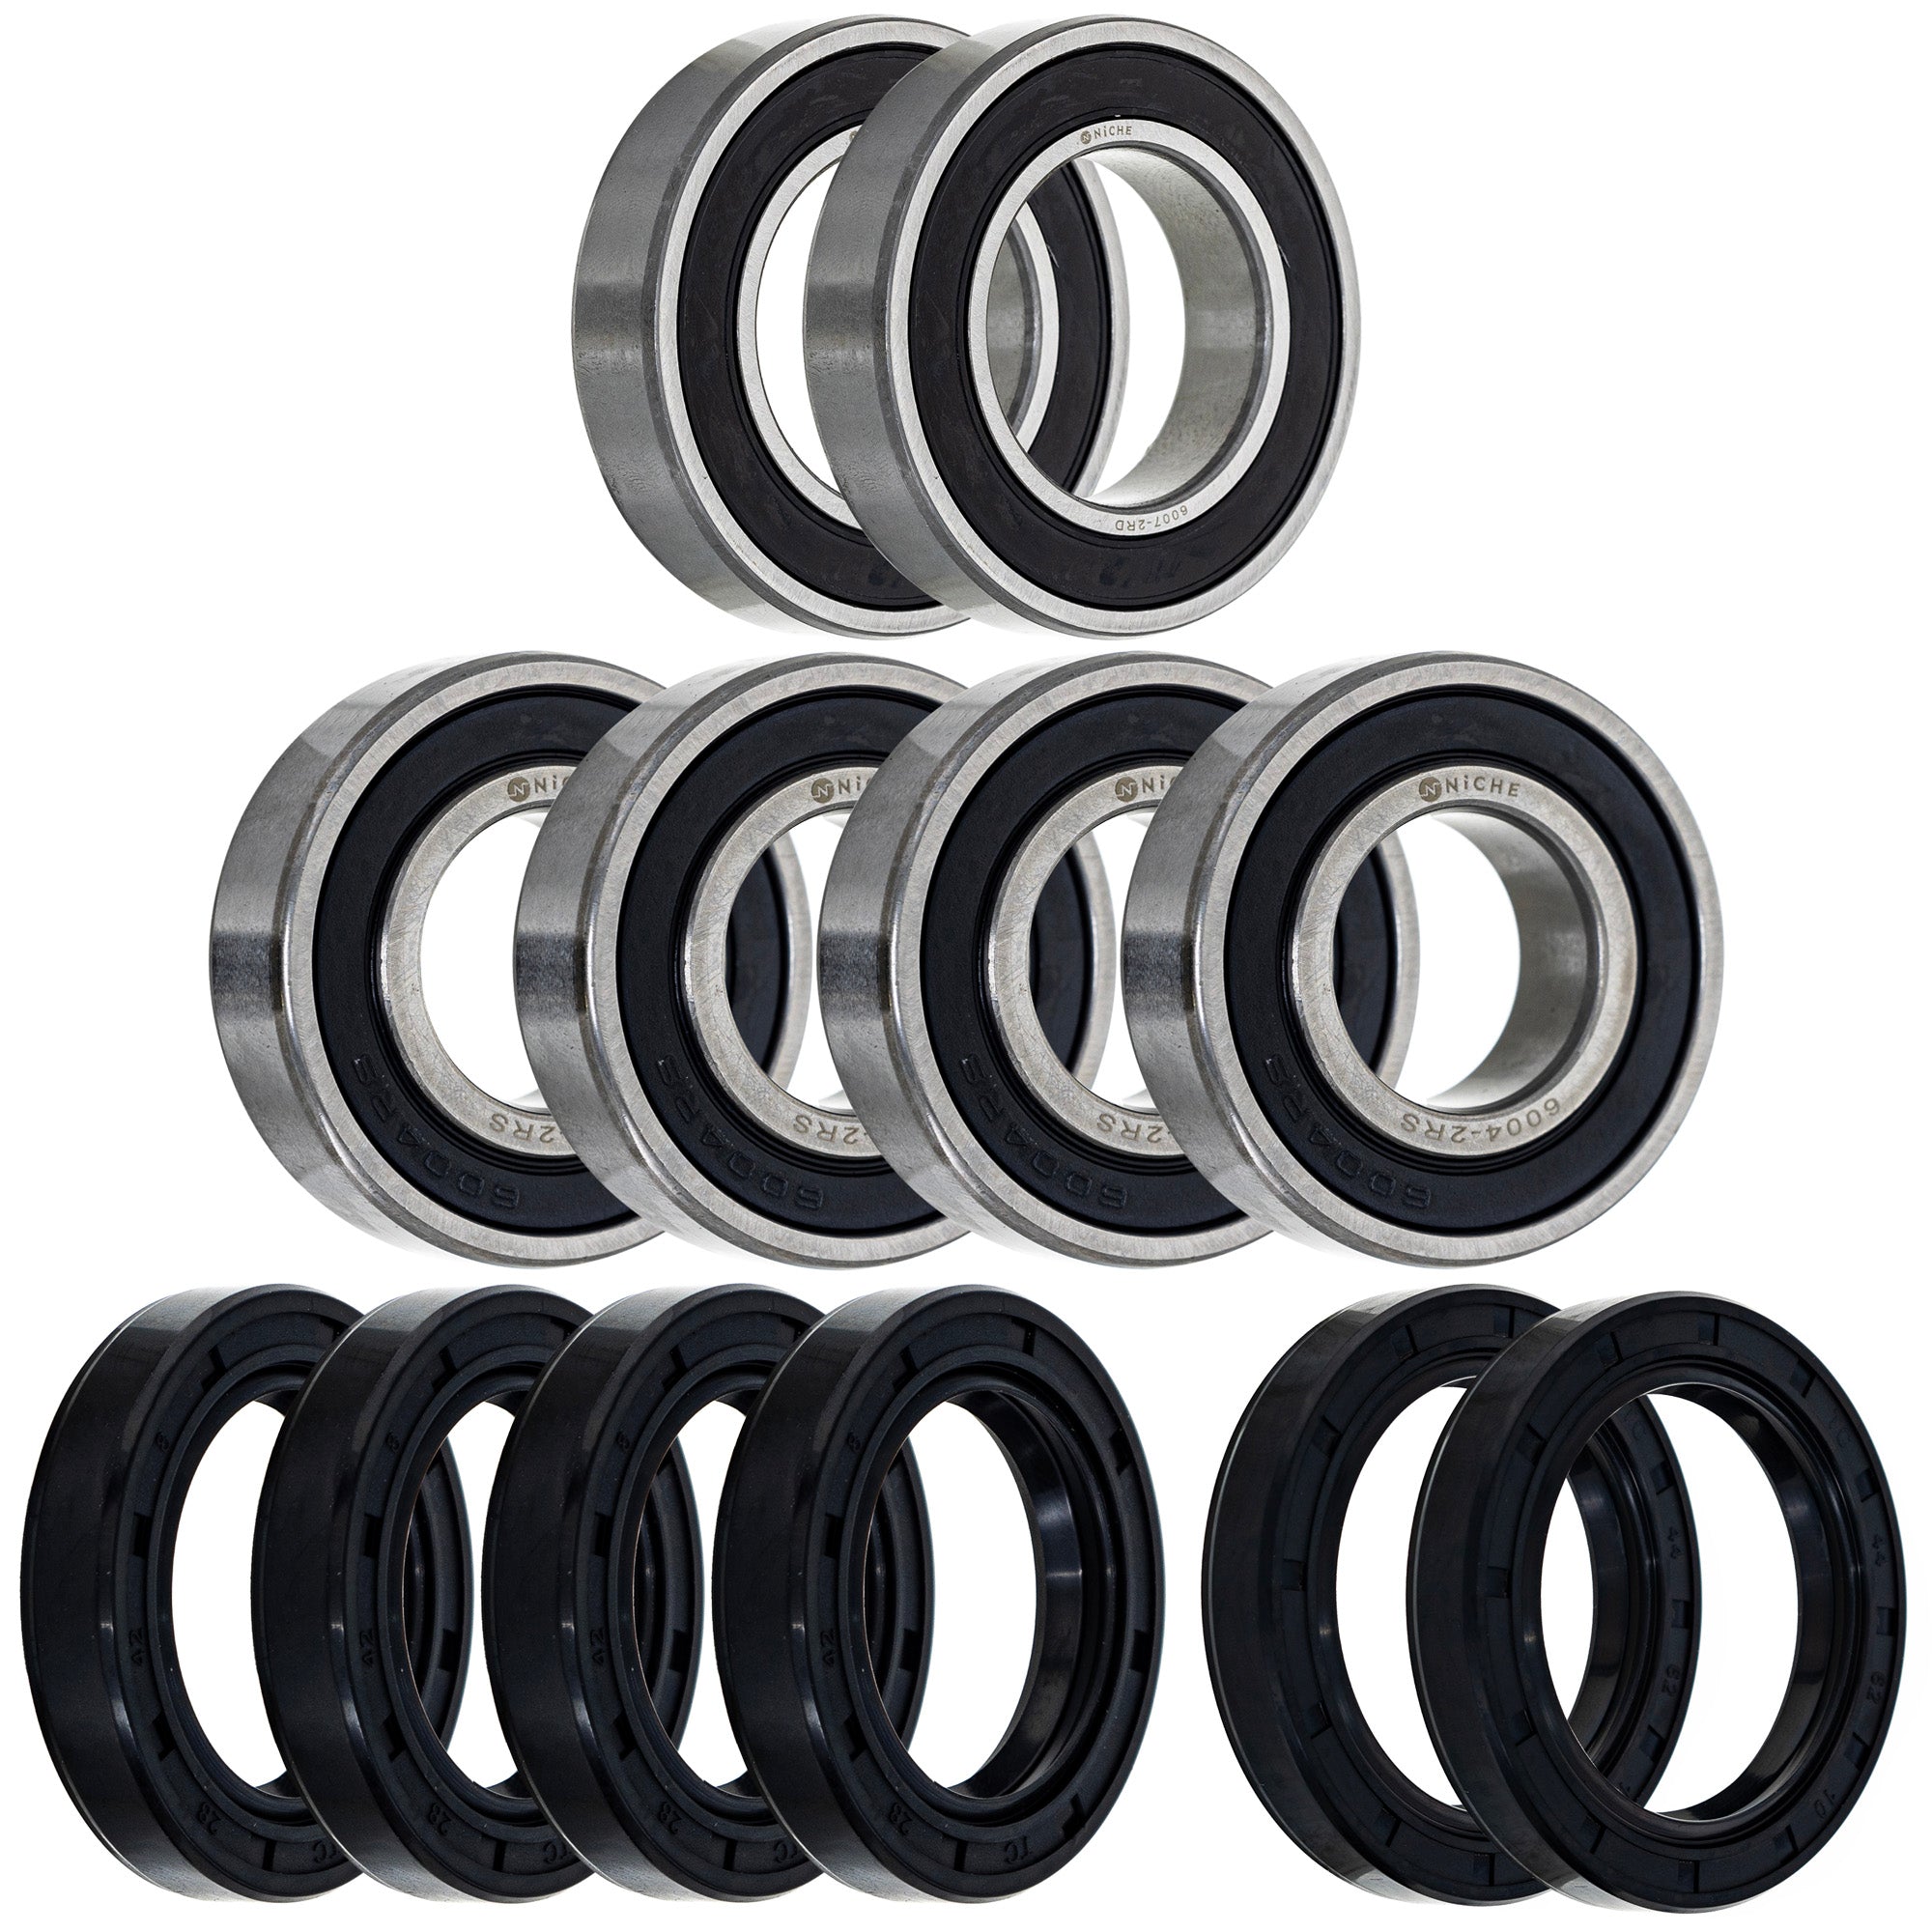 Wheel Bearing Seal Kit for zOTHER Ref No FourTrax NICHE MK1008354